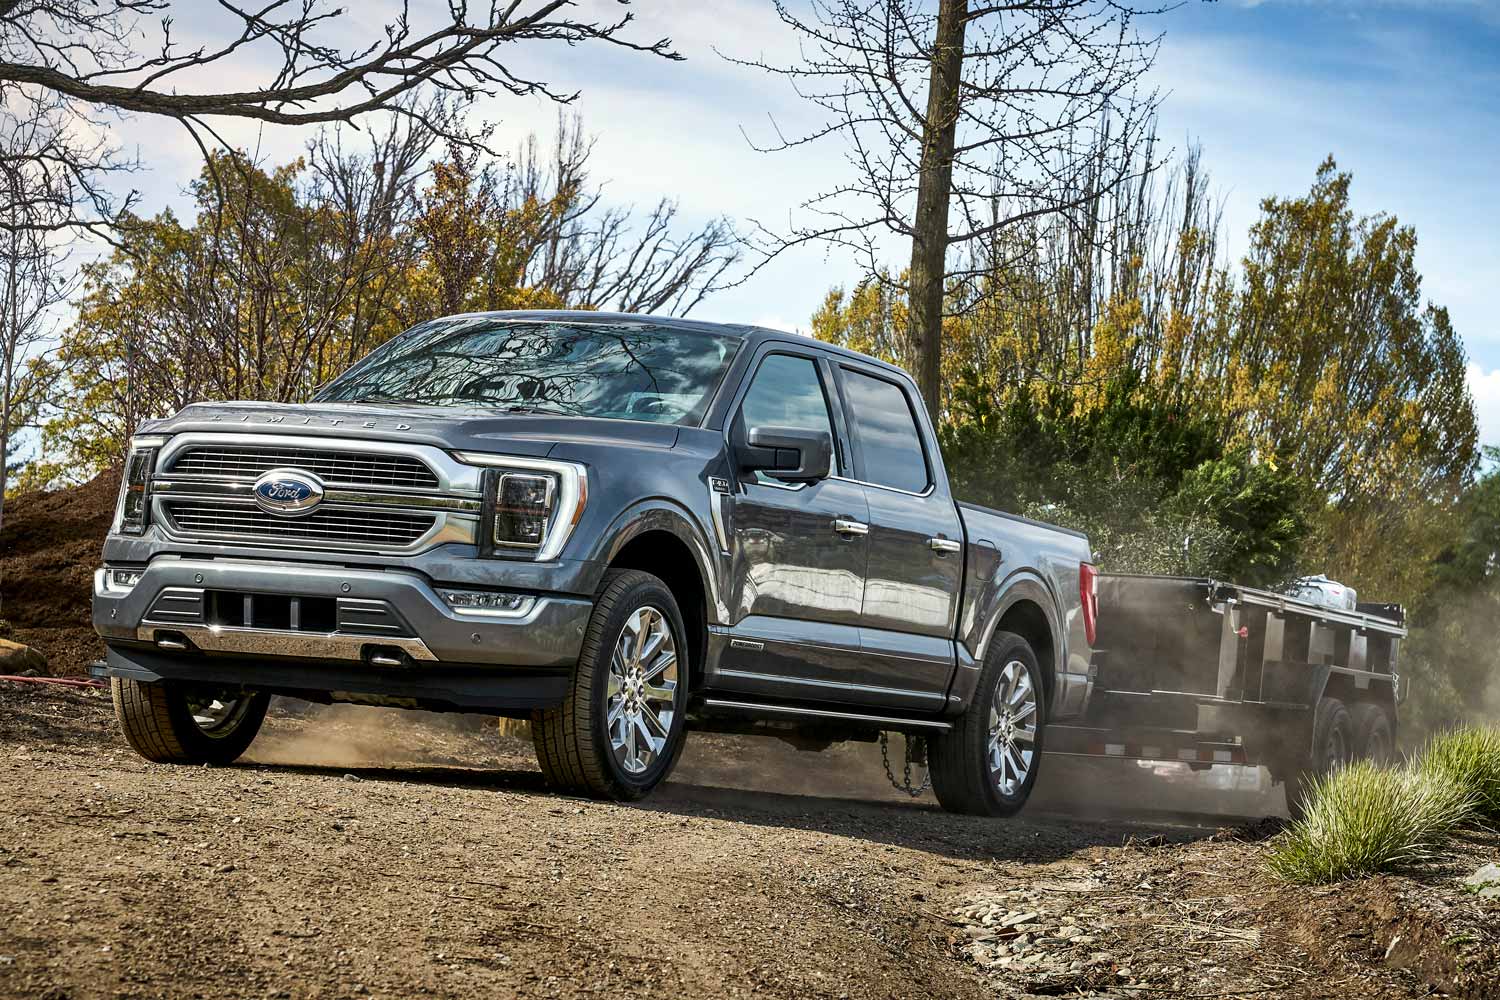 2021 Ford F-150 towing utility trailer on dirt road